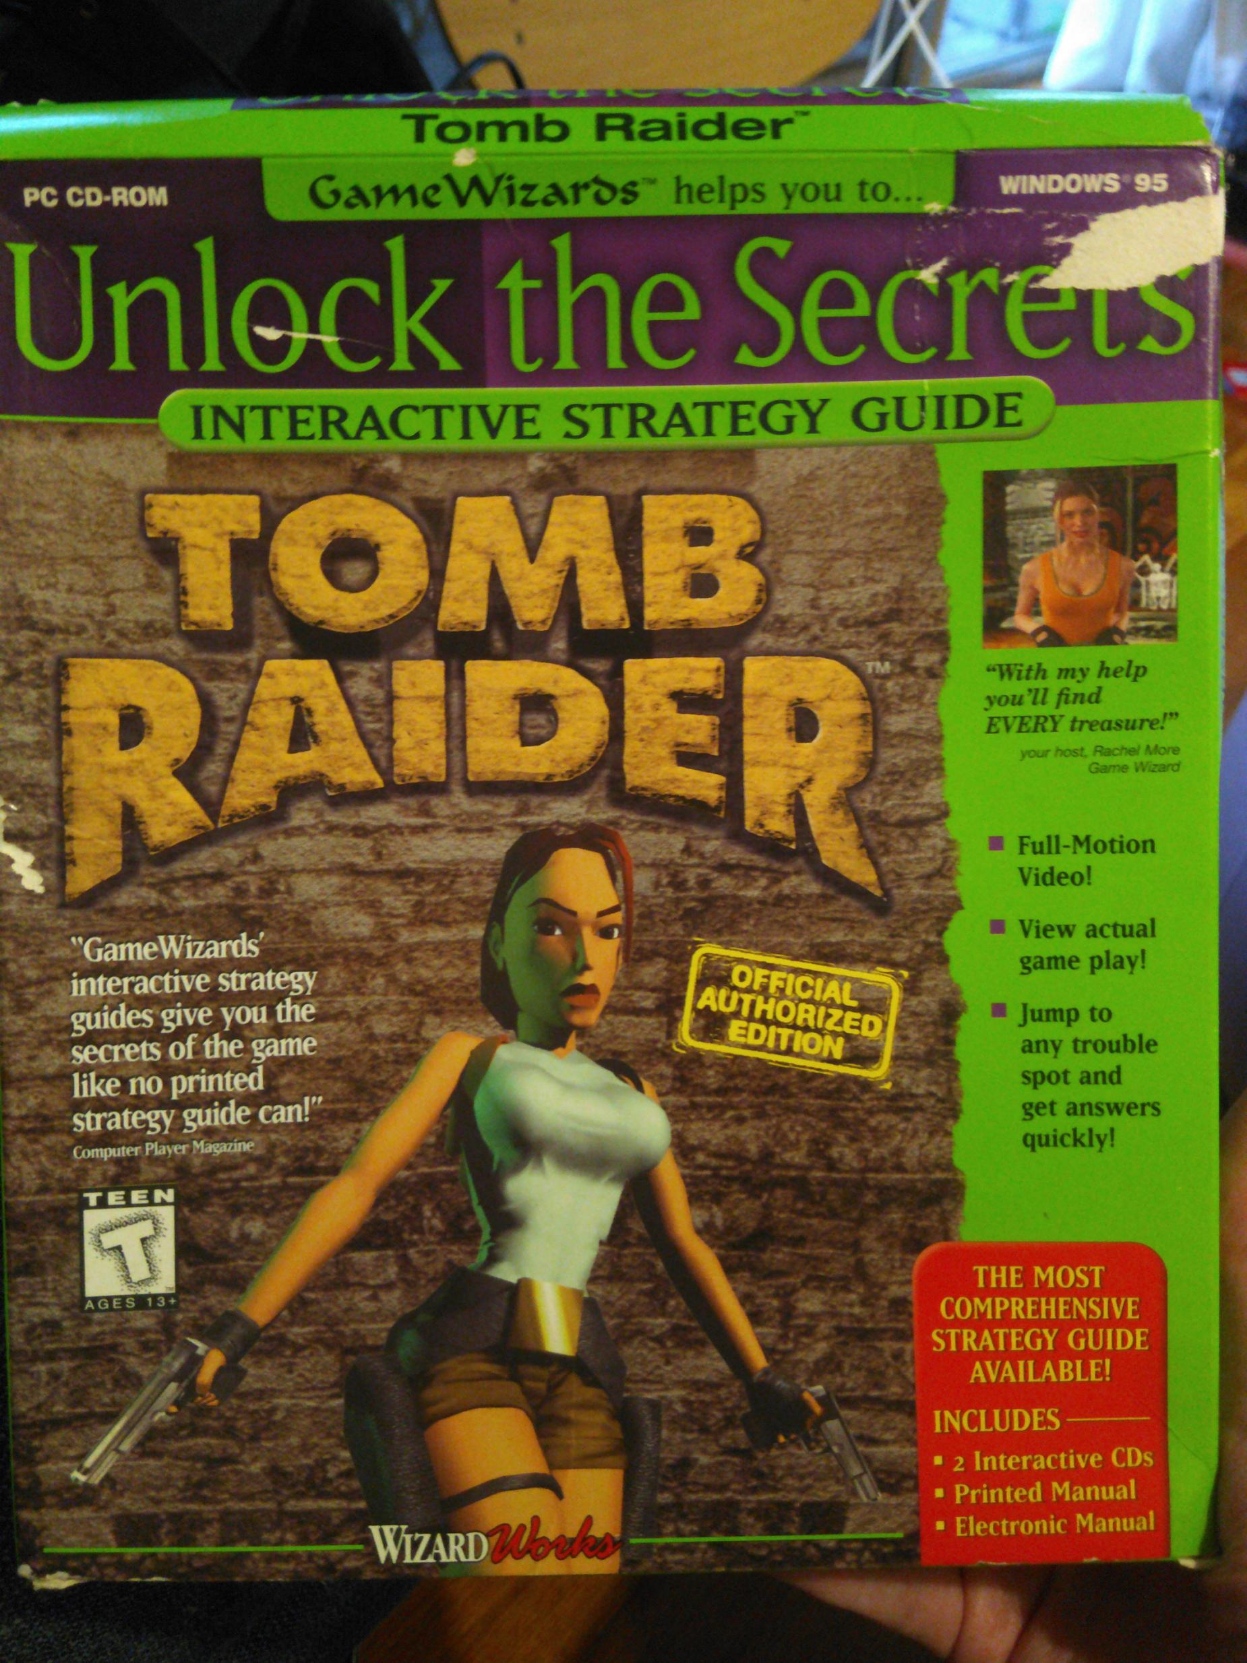 Front cover for the GameWizards Tomb Raider Interactive Strategy Guide, promising "full motion video", "view actual game play", and "jump to any trouble spot and get answers quickly" as major selling points.